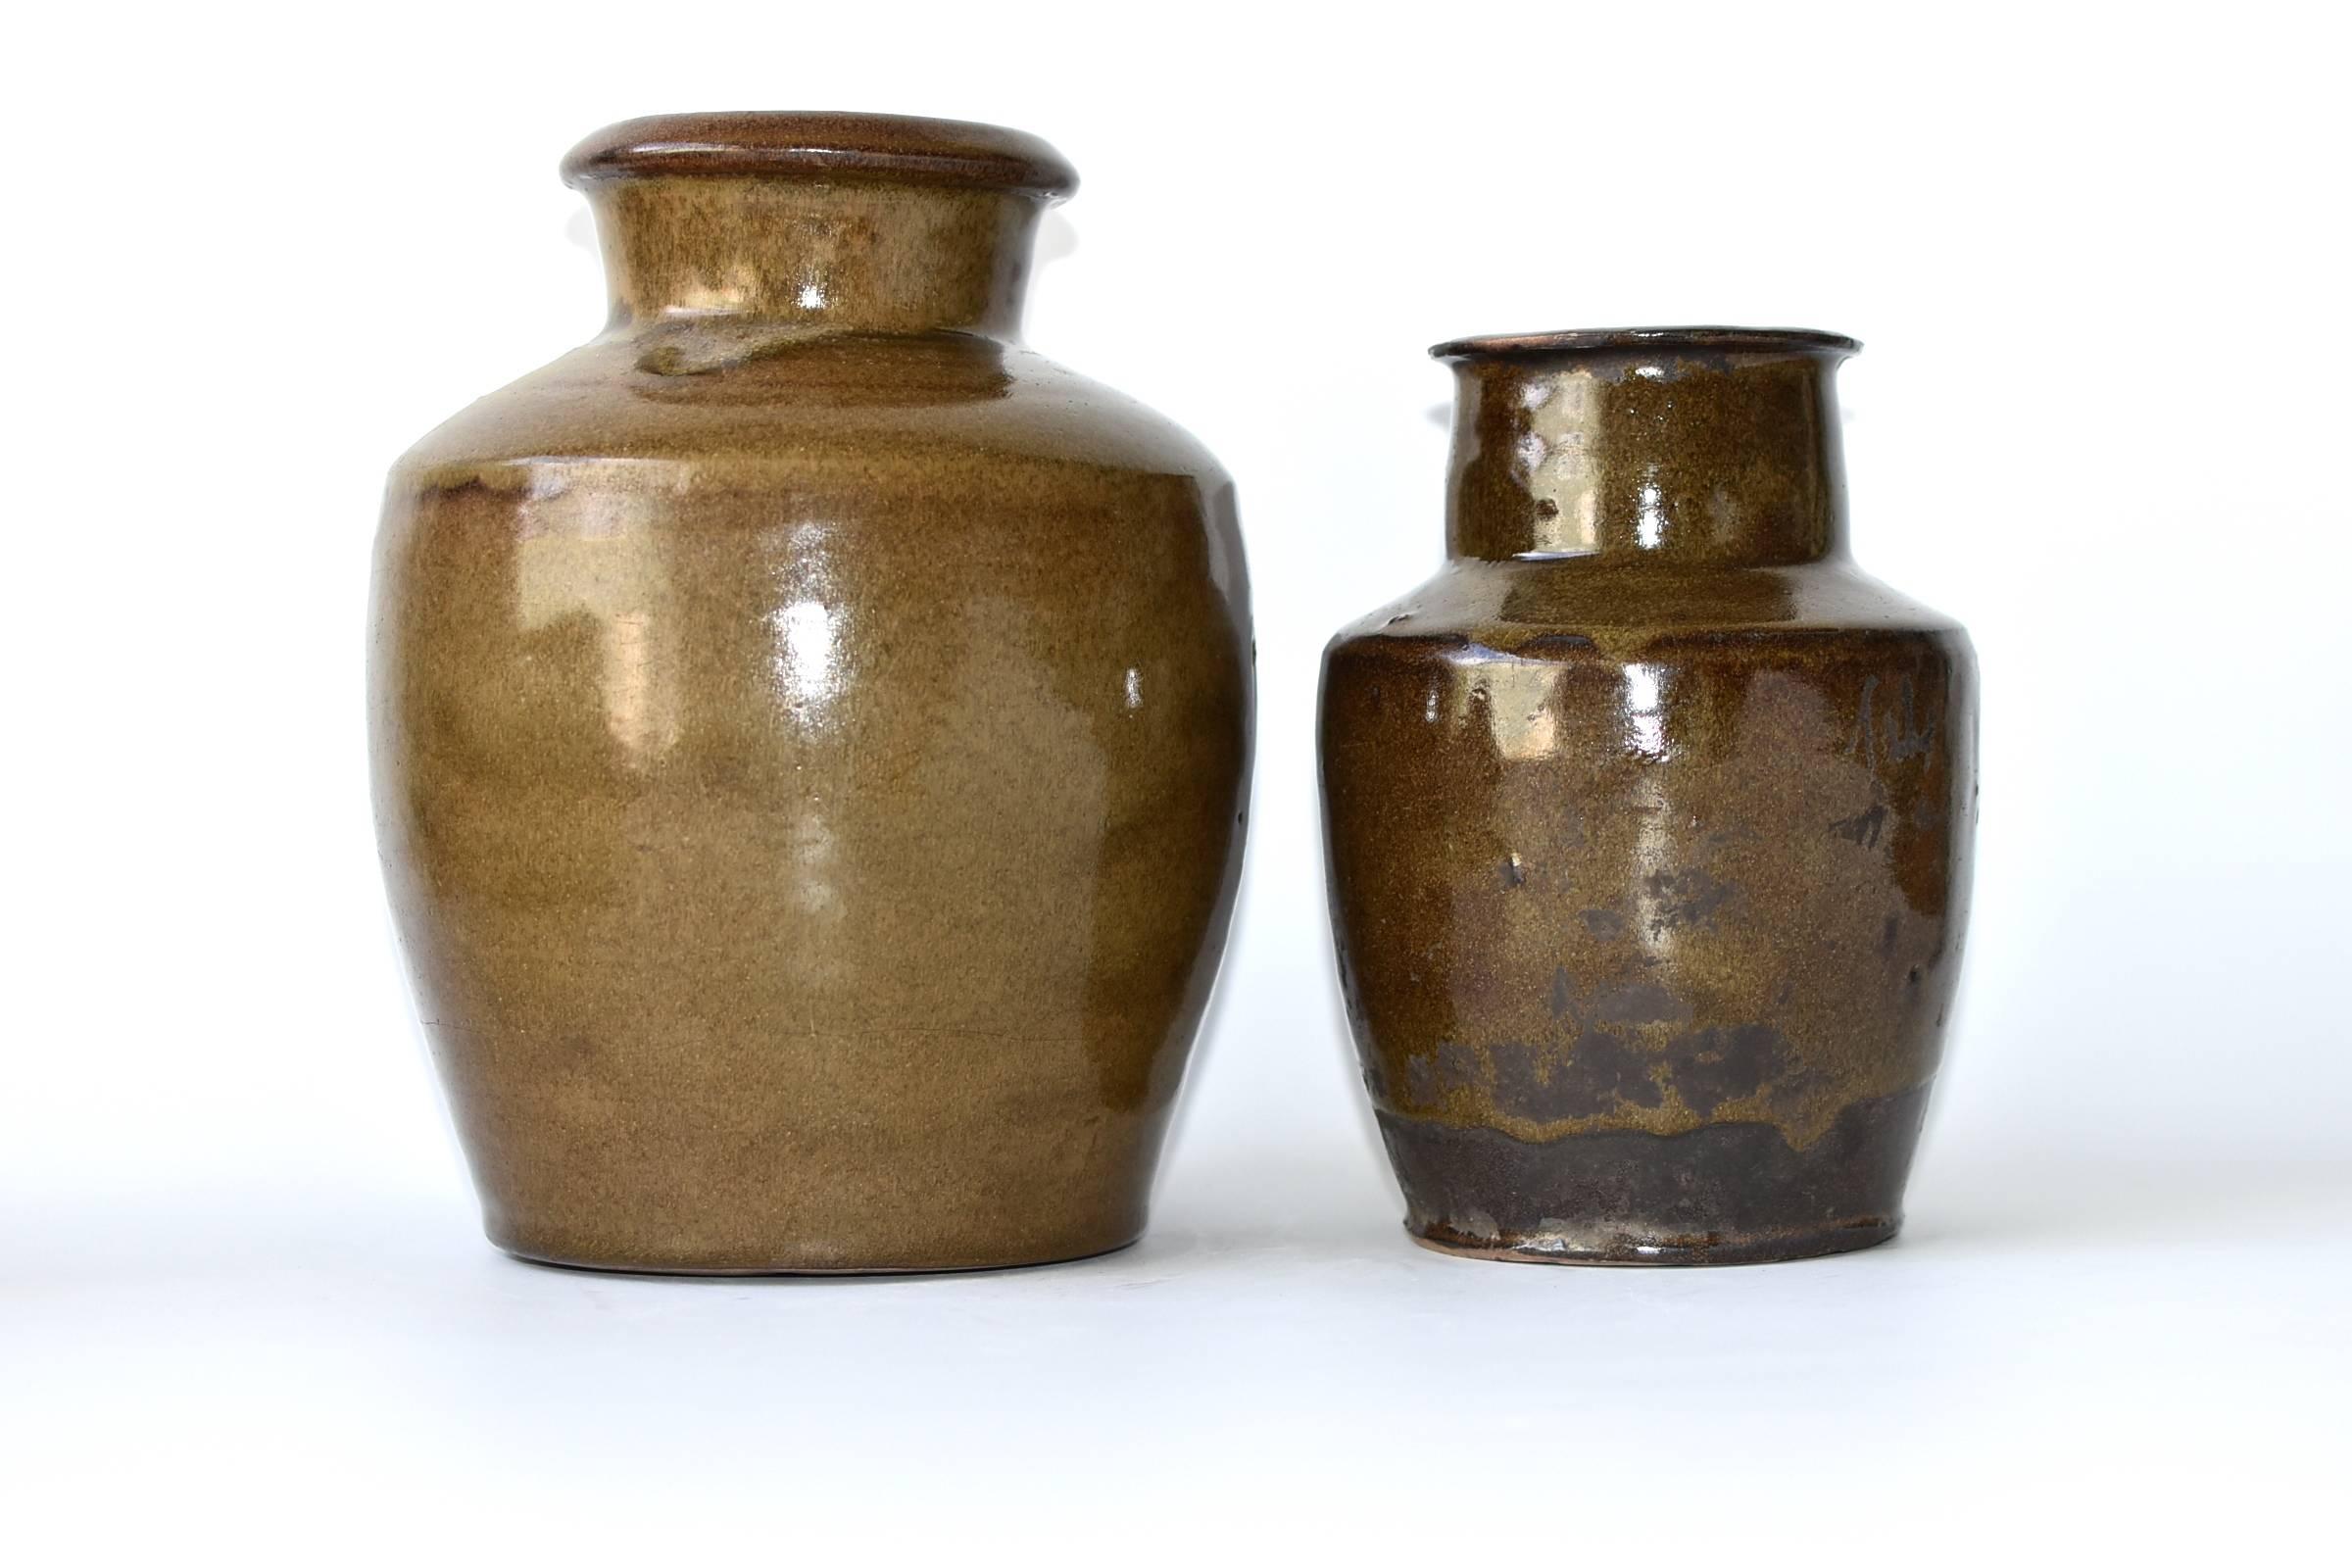 Beautiful antique jars with refreshing and unique olive color and dripped glazes. These wonderful pieces are from Shanxi province, an ancient state of China. The area is famous for producing rich, aromatic, dark vinegar. Historically these jars were